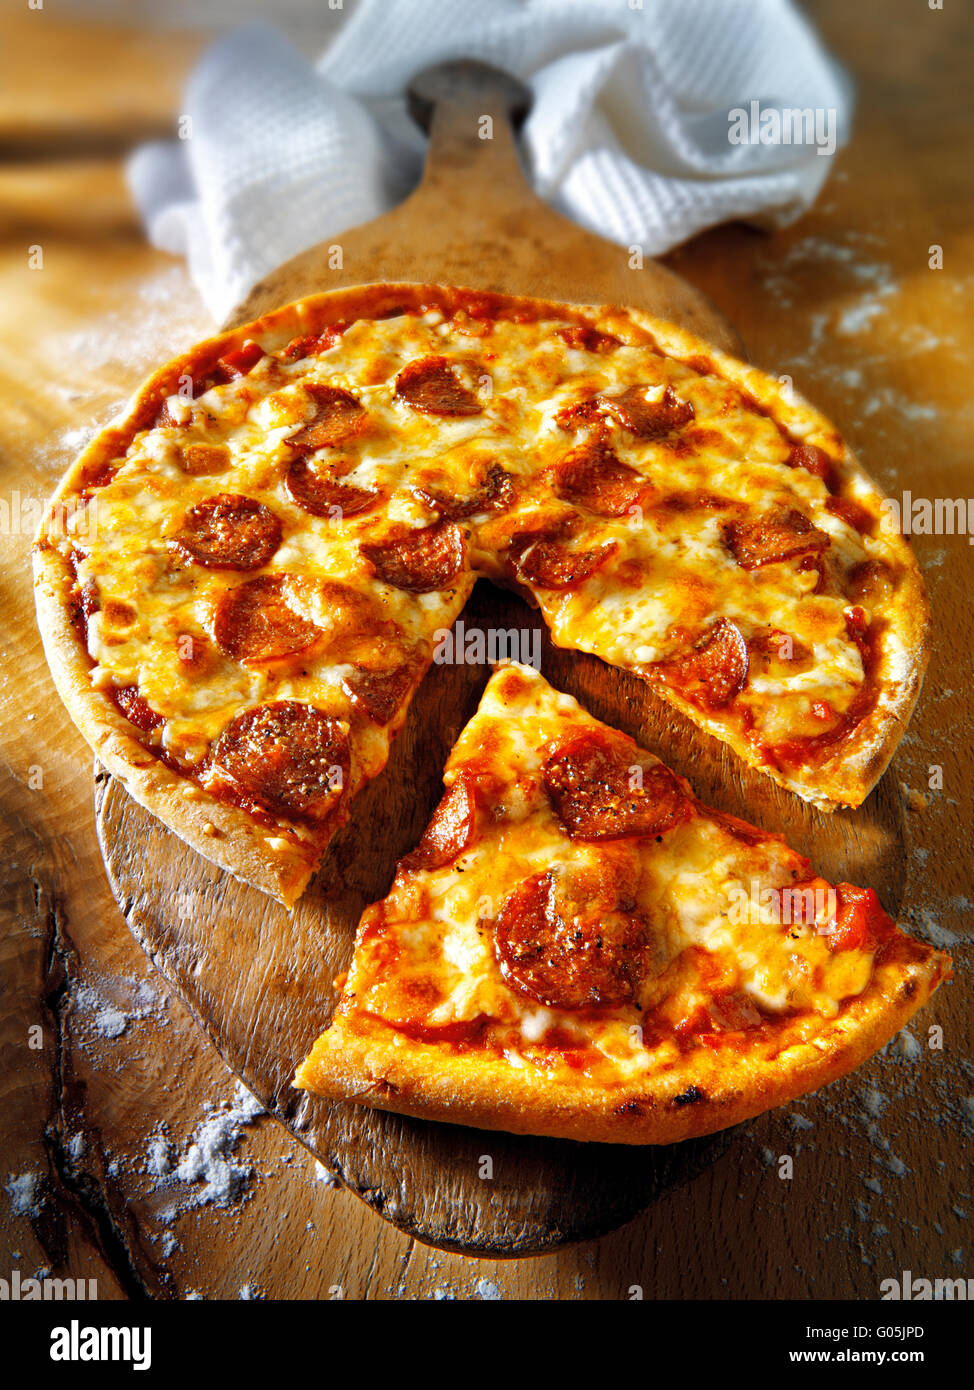 Cooked whole cheese and tomato pepperoni pizza with  a cut slice Stock Photo